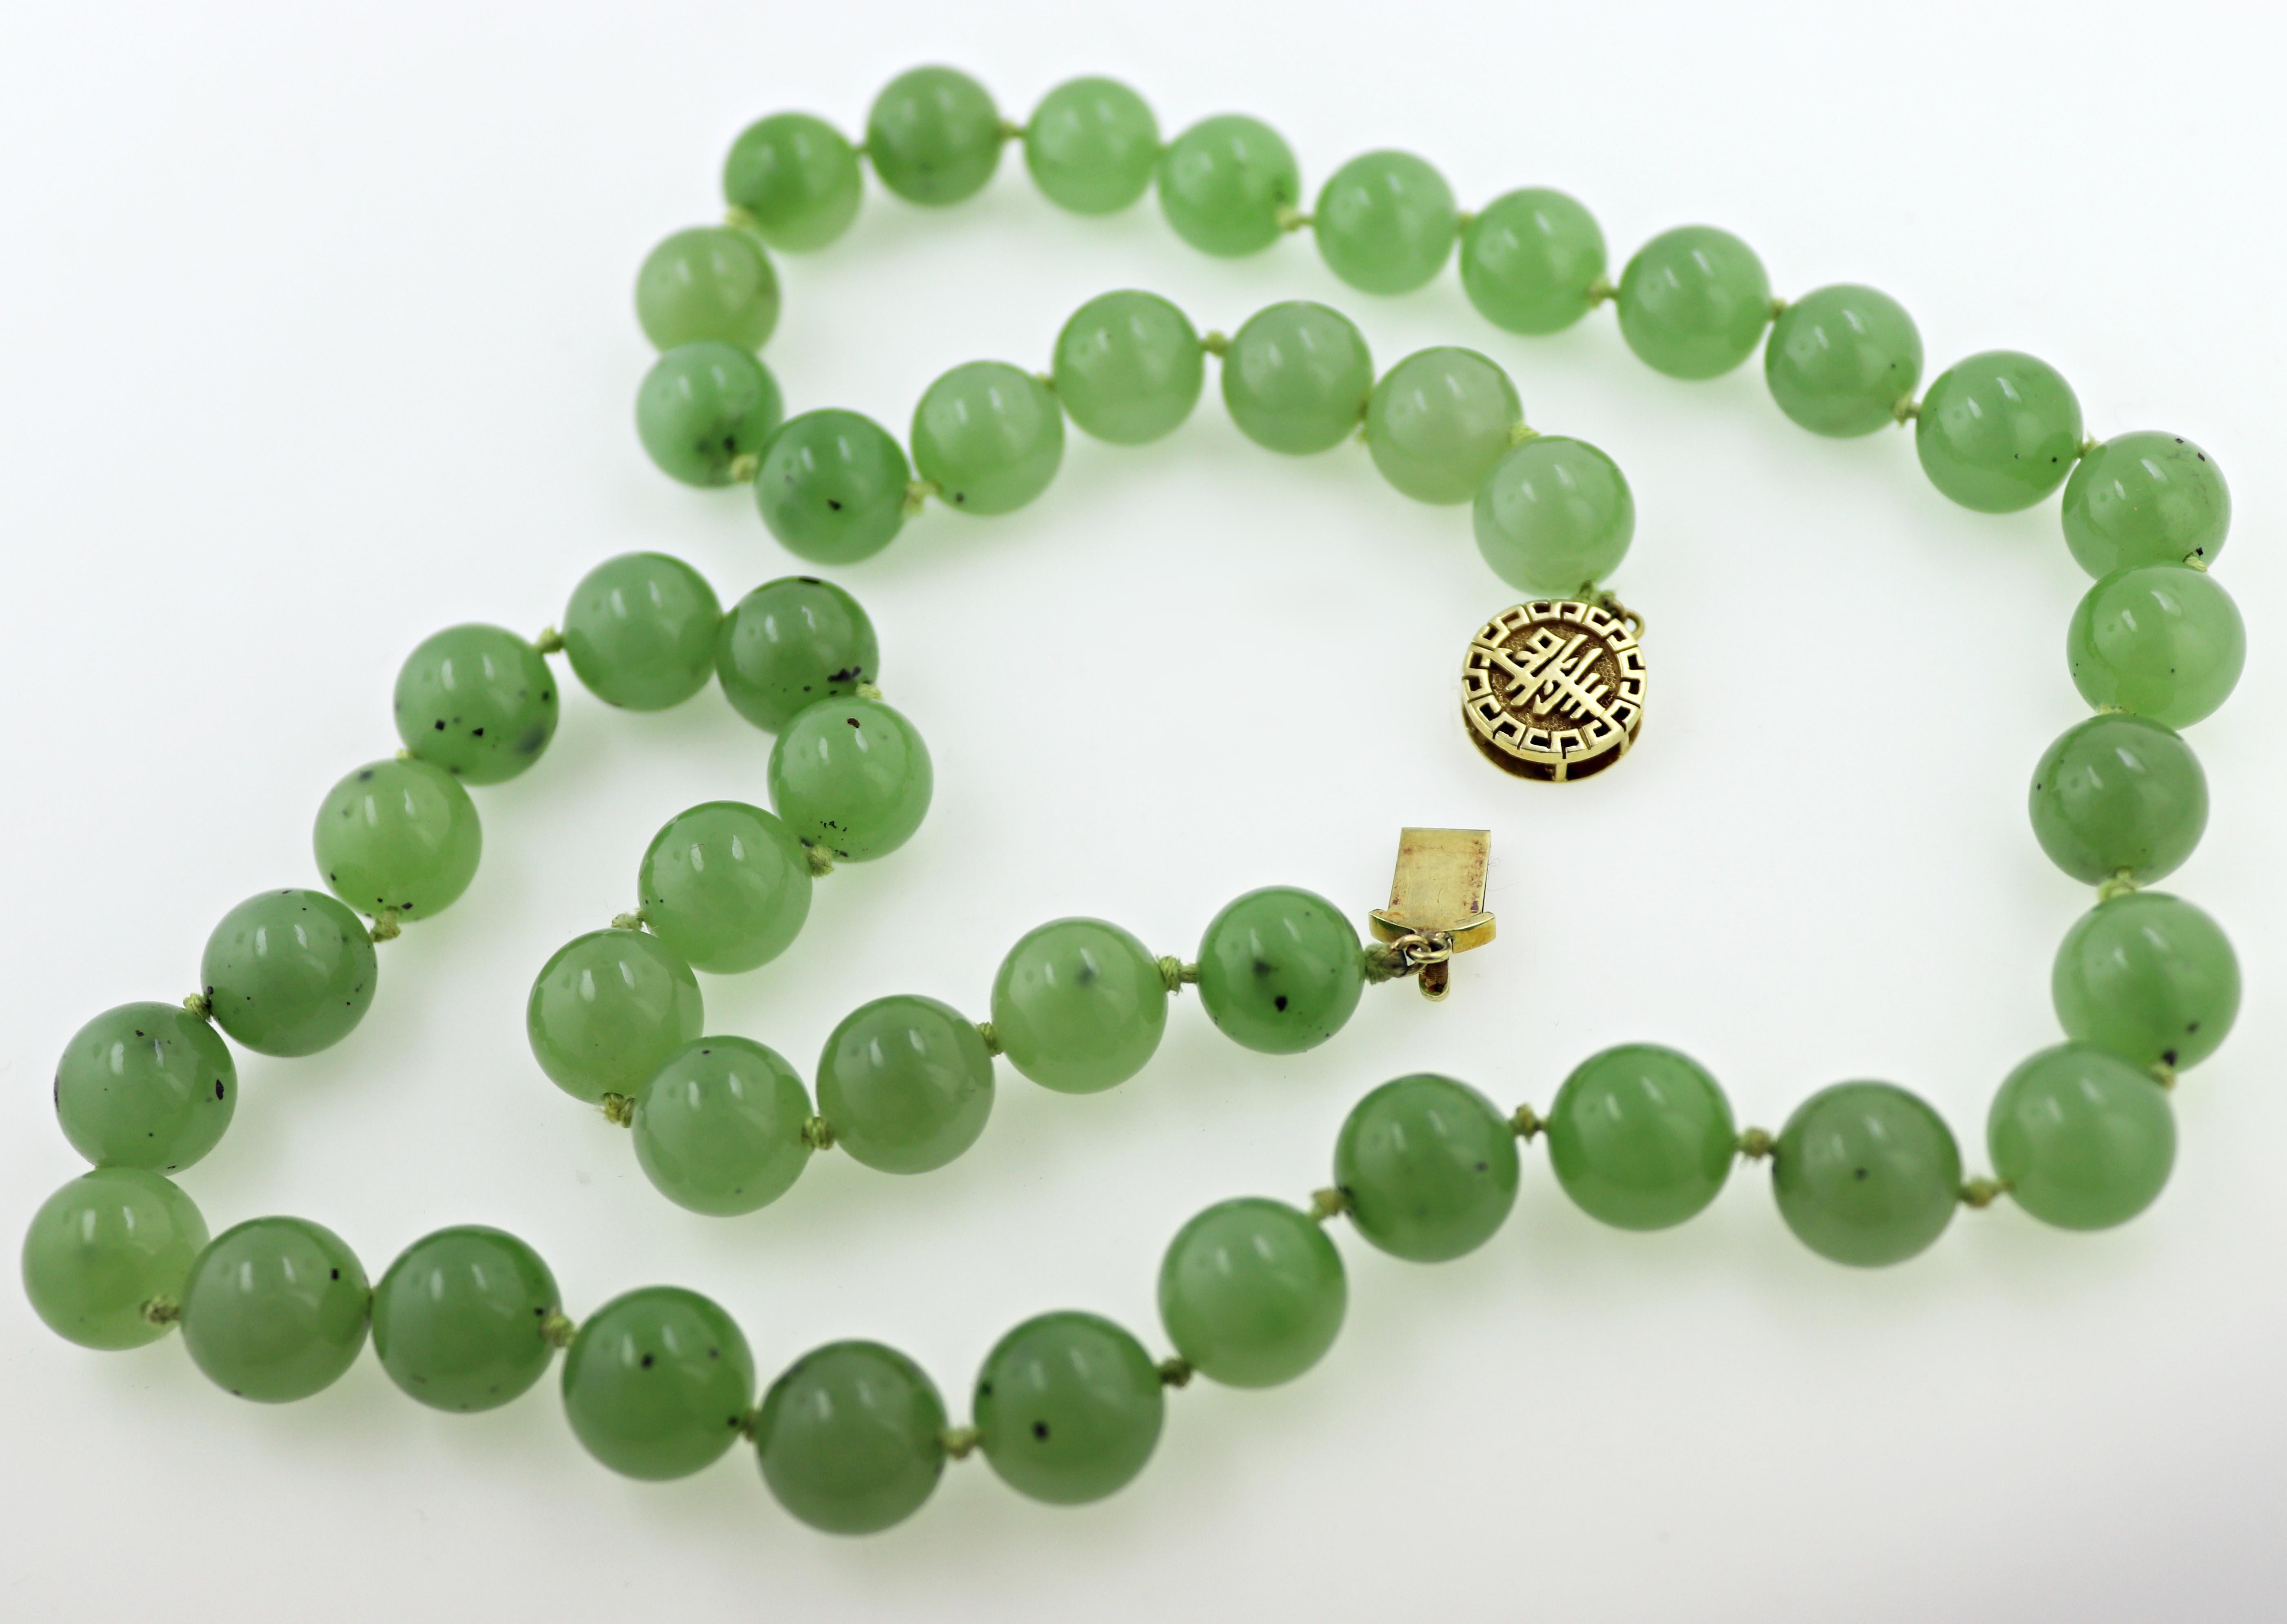 Siberian Nephrite Jade, 14k Gold Necklace, Bracelet and Earrings Jewelry Suite For Sale 5